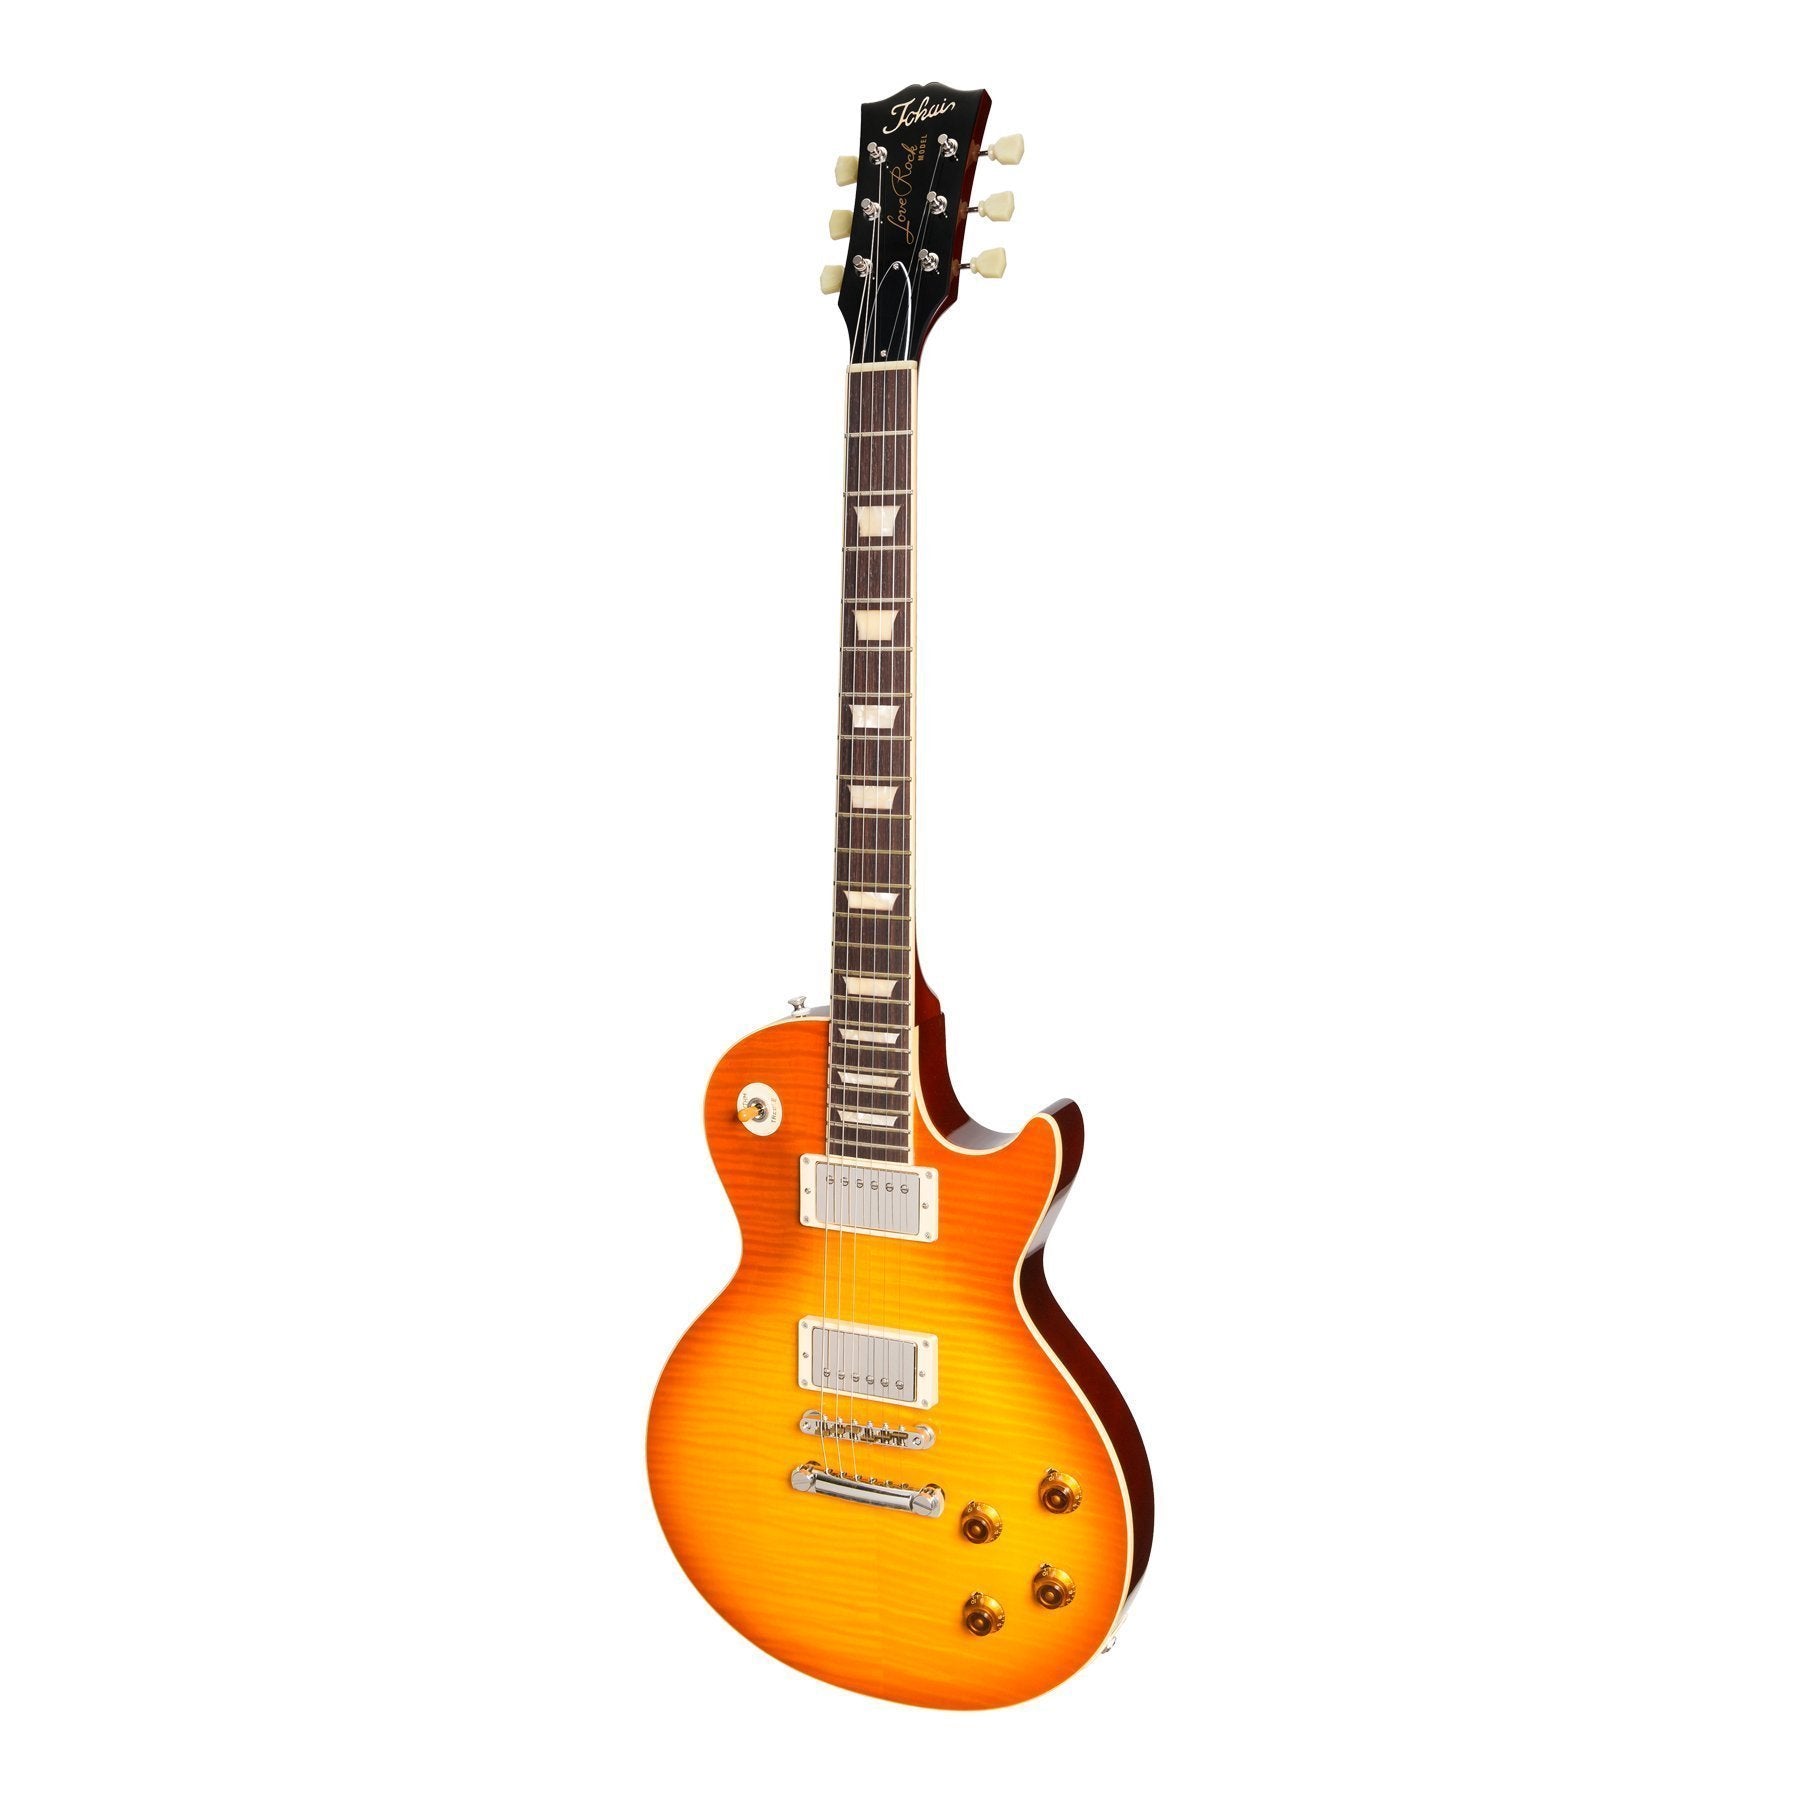 https://cdn.shopify.com/s/files/1/1636/6967/products/Tokai-Vintage-Series-LS-140F-AAA-Flame-Top-LP-Style-Electric-Guitar-Violin-Finish-LS-140F-VF_b4e3c0d8-a626-4a27-9a14-4ee70d2097dd.jpg?v=1637687678